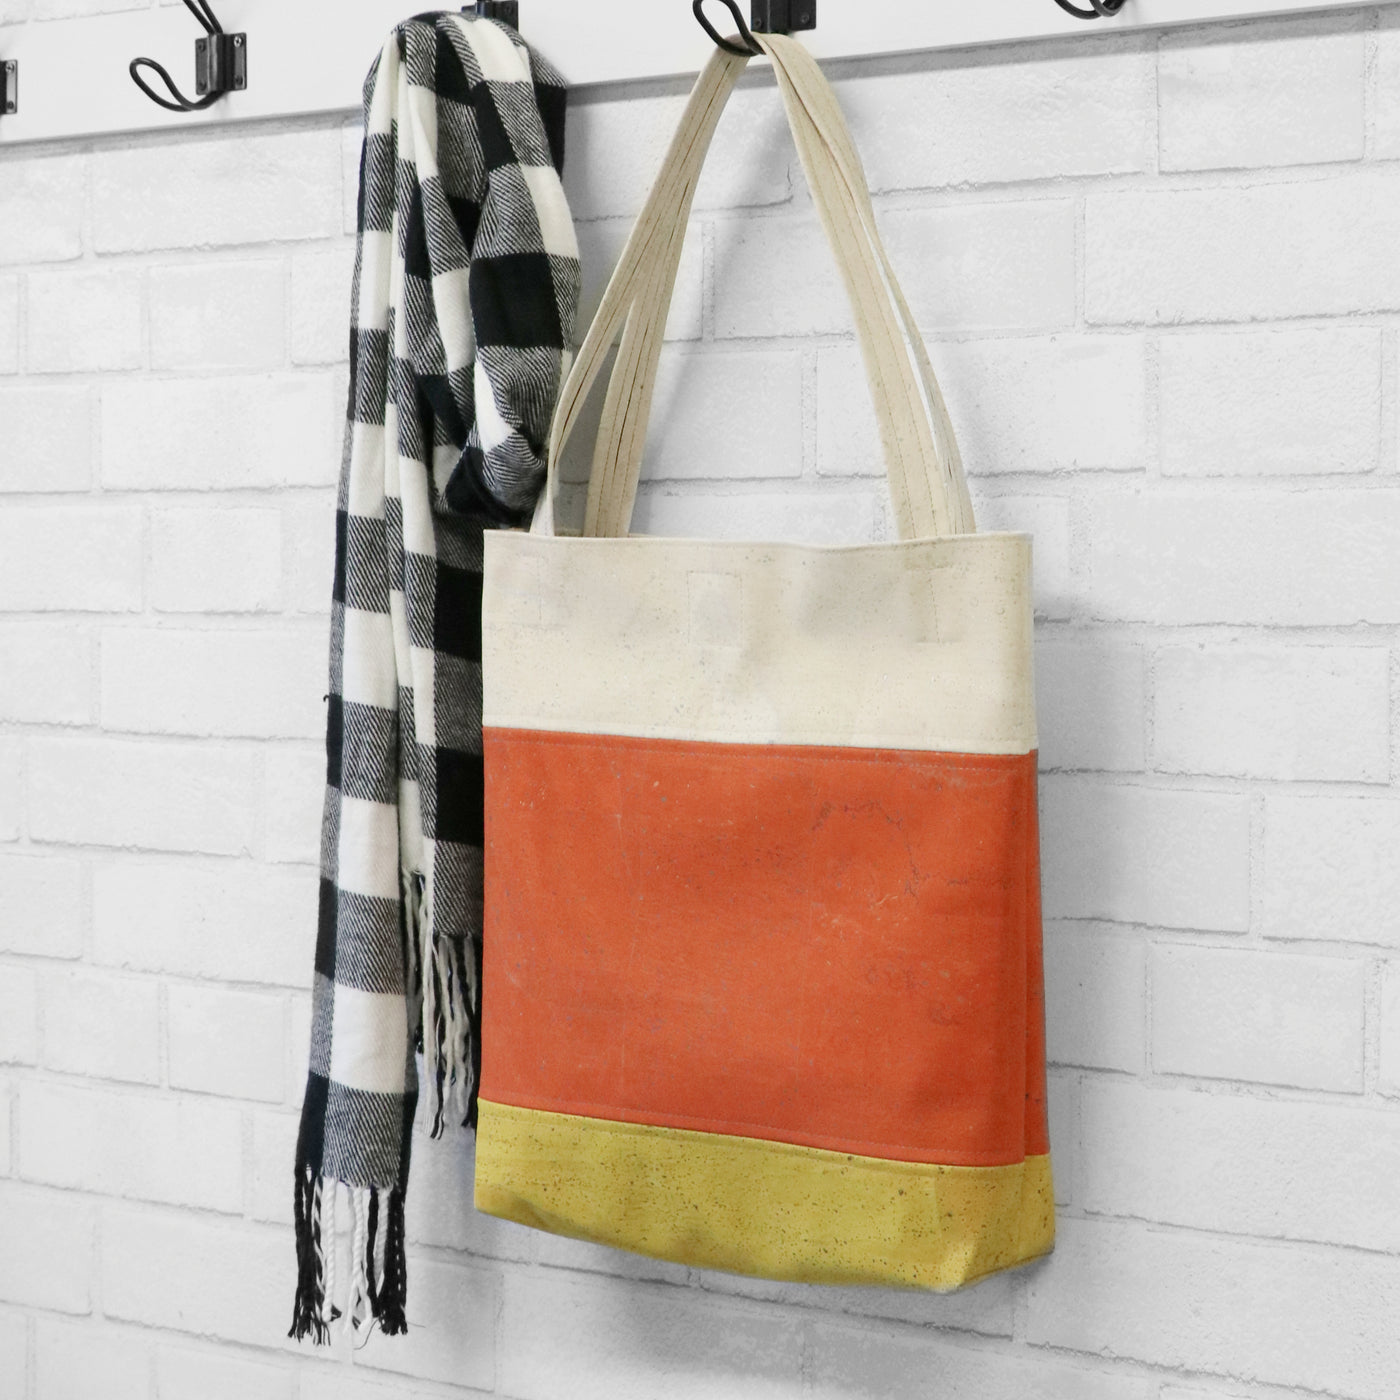 AUCTION- Back to Basics Tote- Platinum, Terra Cotta, and Mustard Cork Fabric